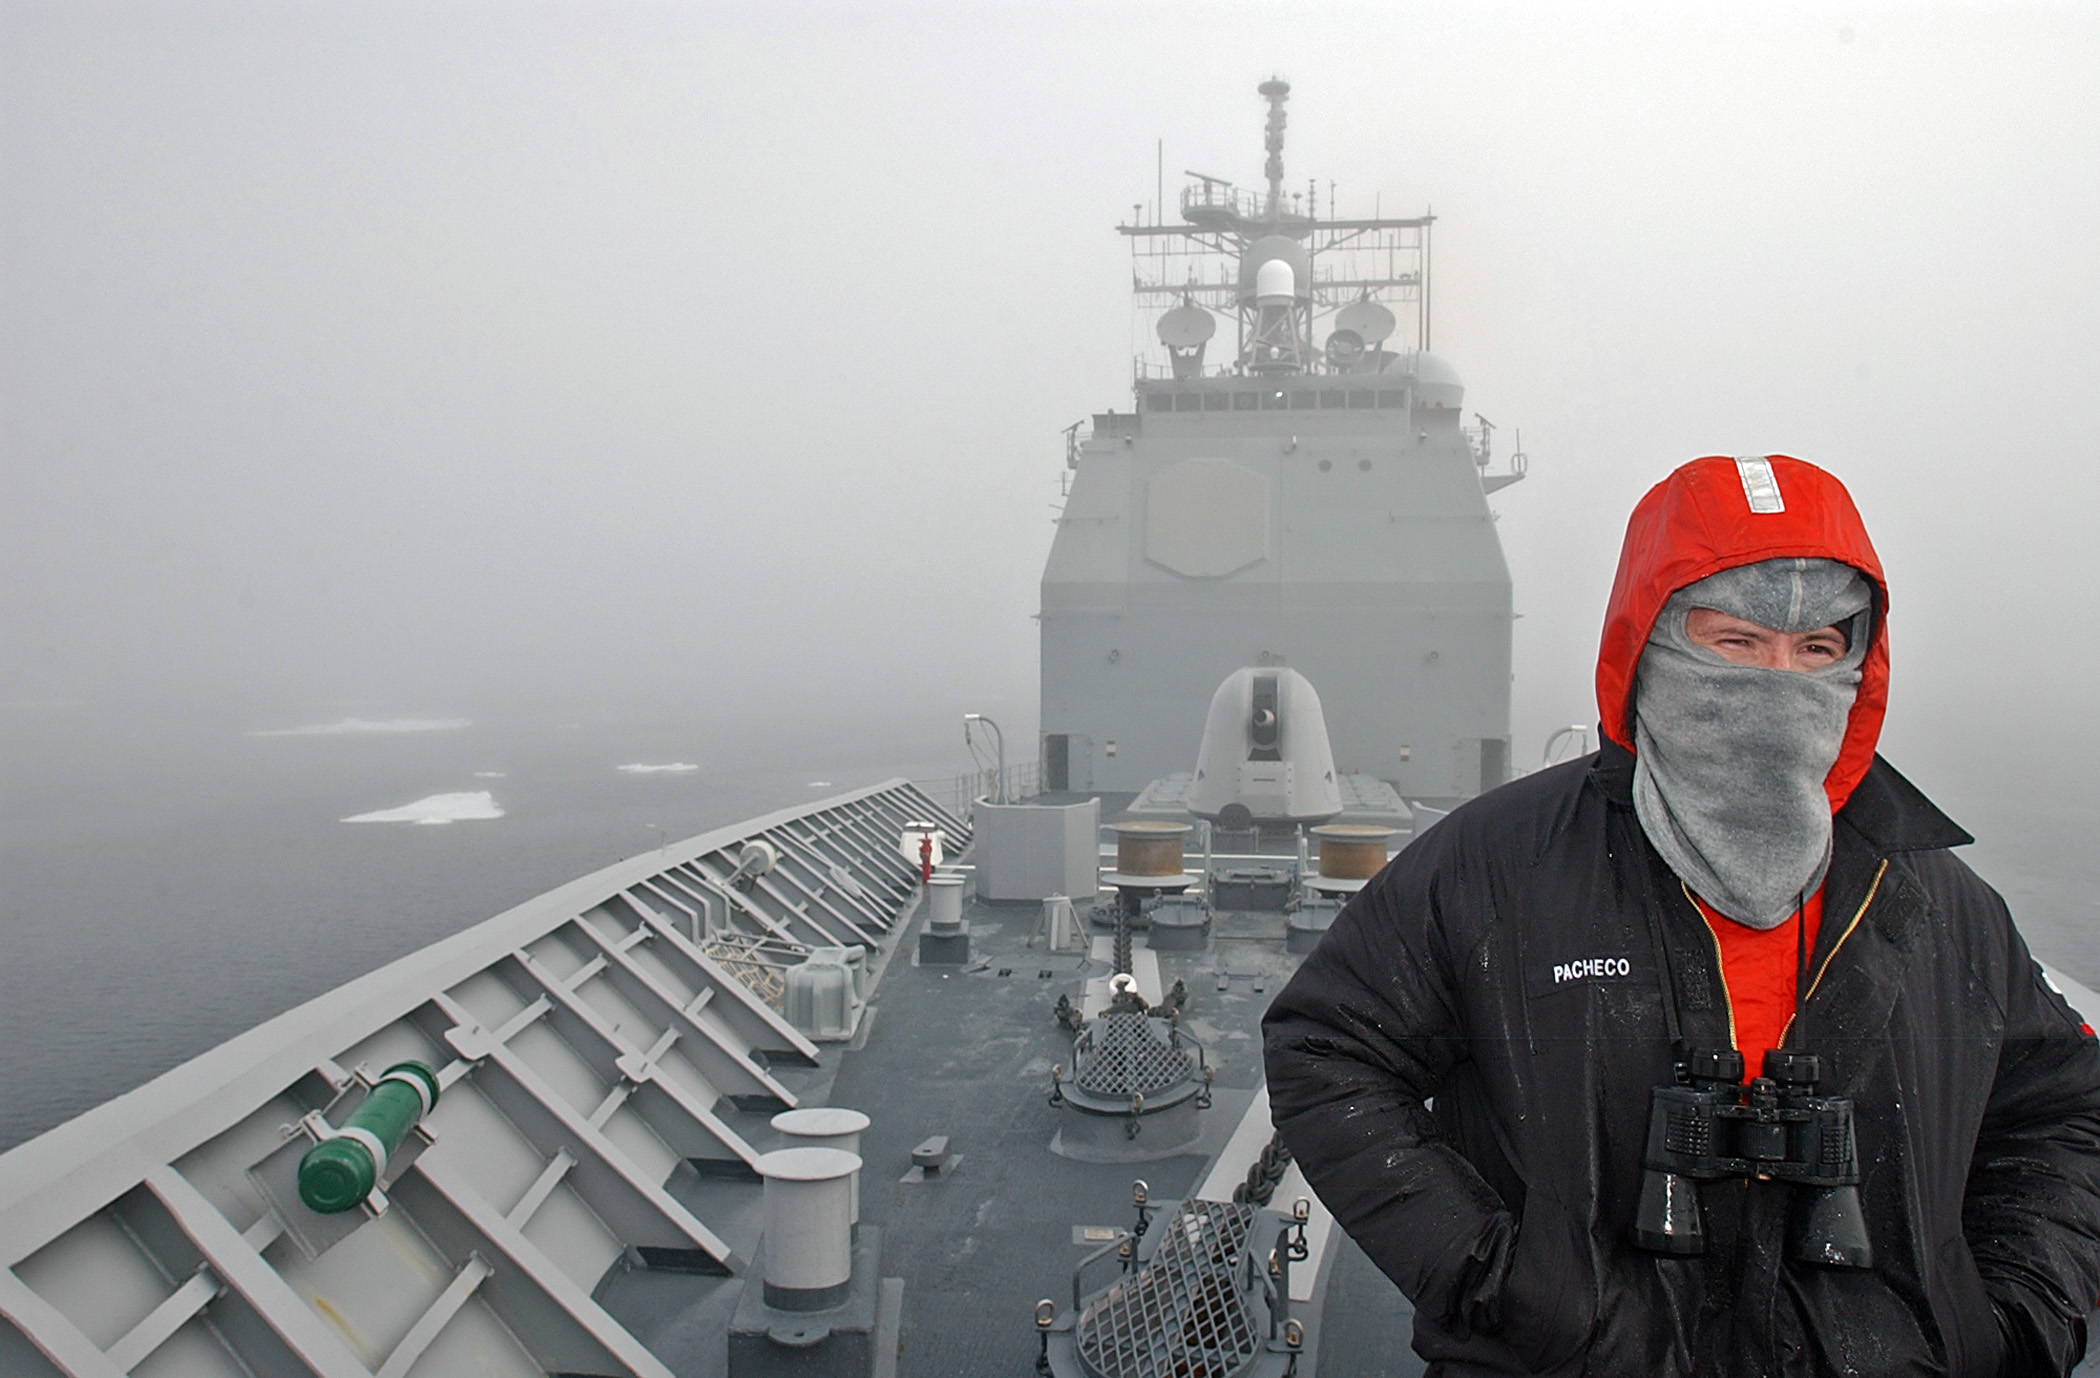 US_Navy_070612-N-5459S-049_Personnel_Specialist_3rd_Class_Wilbert_E._Pacheco,_a_Sailor_assigned_to_guided-missile_cruiser_USS_Normandy_(CG_60),_stands_a_low_visibility_lookout_on_the_forecastle_in_the_Arctic_Ocean.jpg